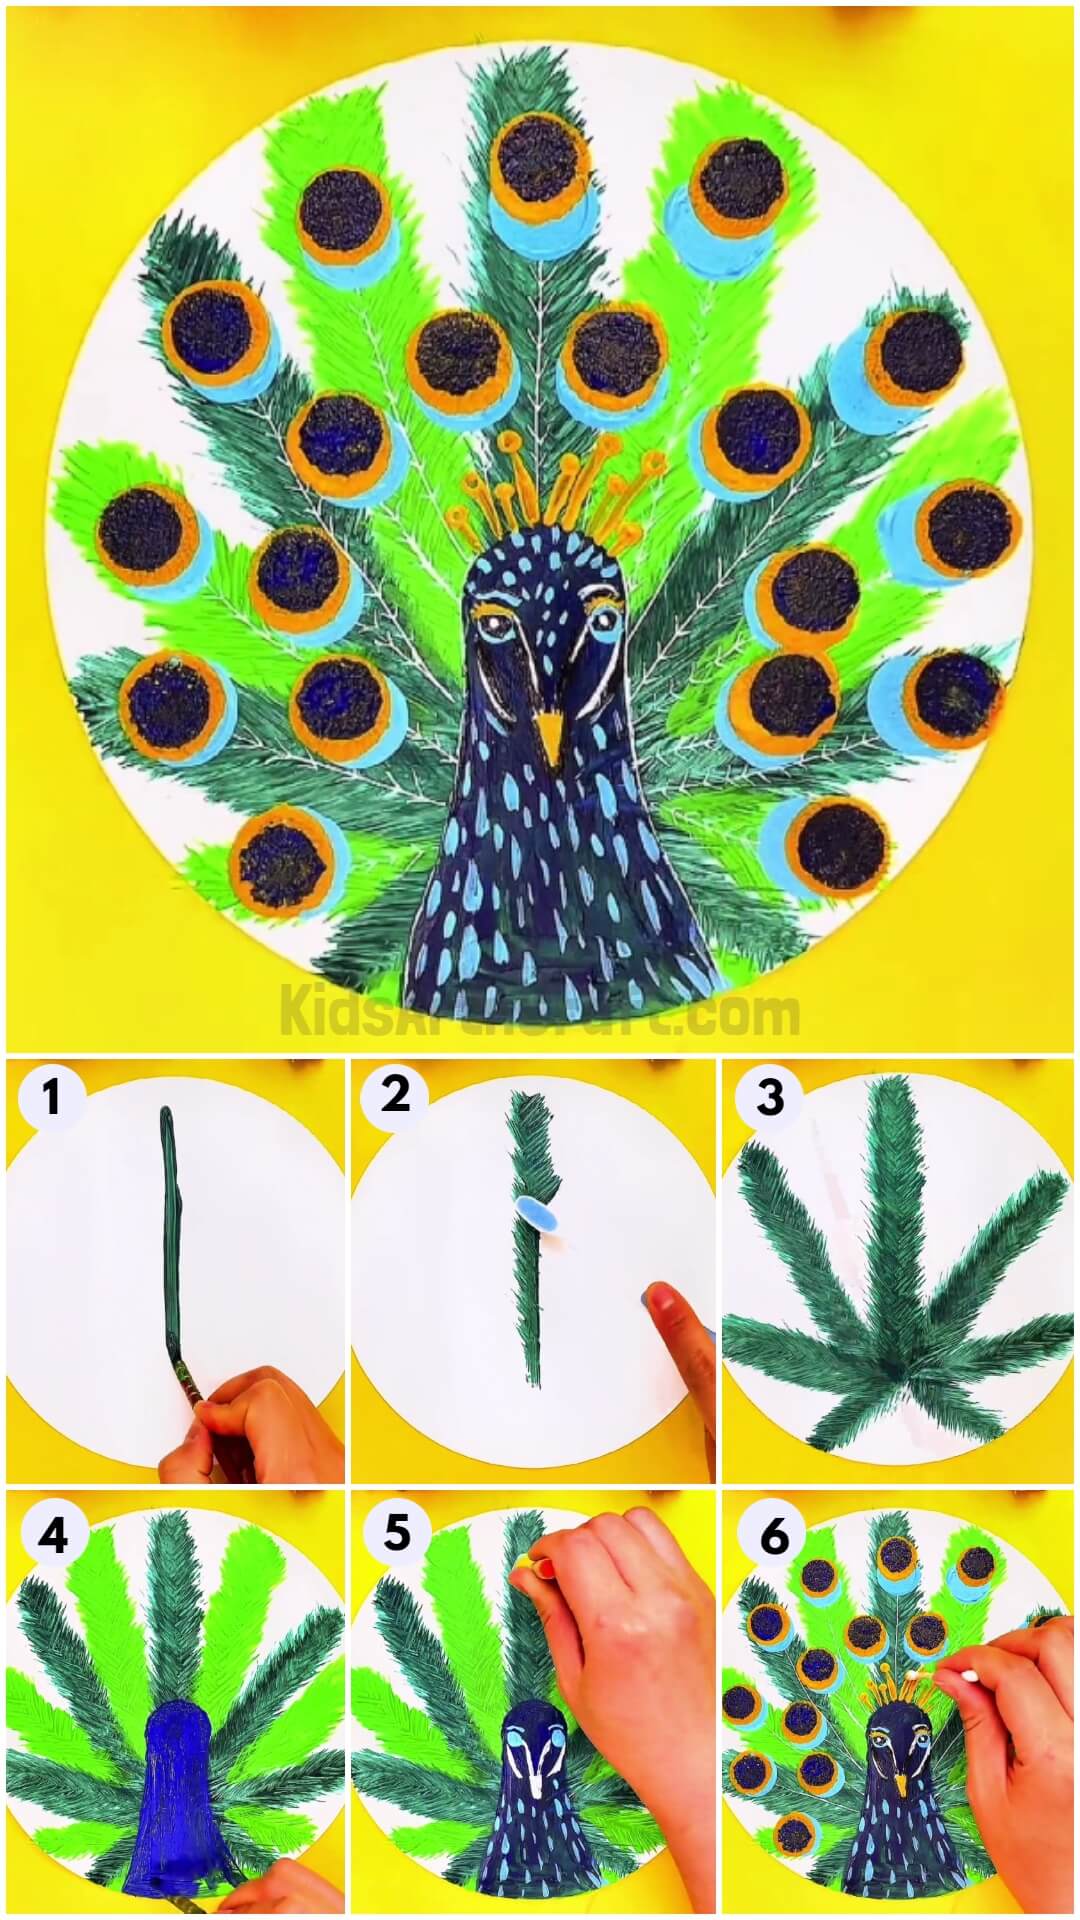 Realistic Peacock Painting Idea Step-by-step Instructions